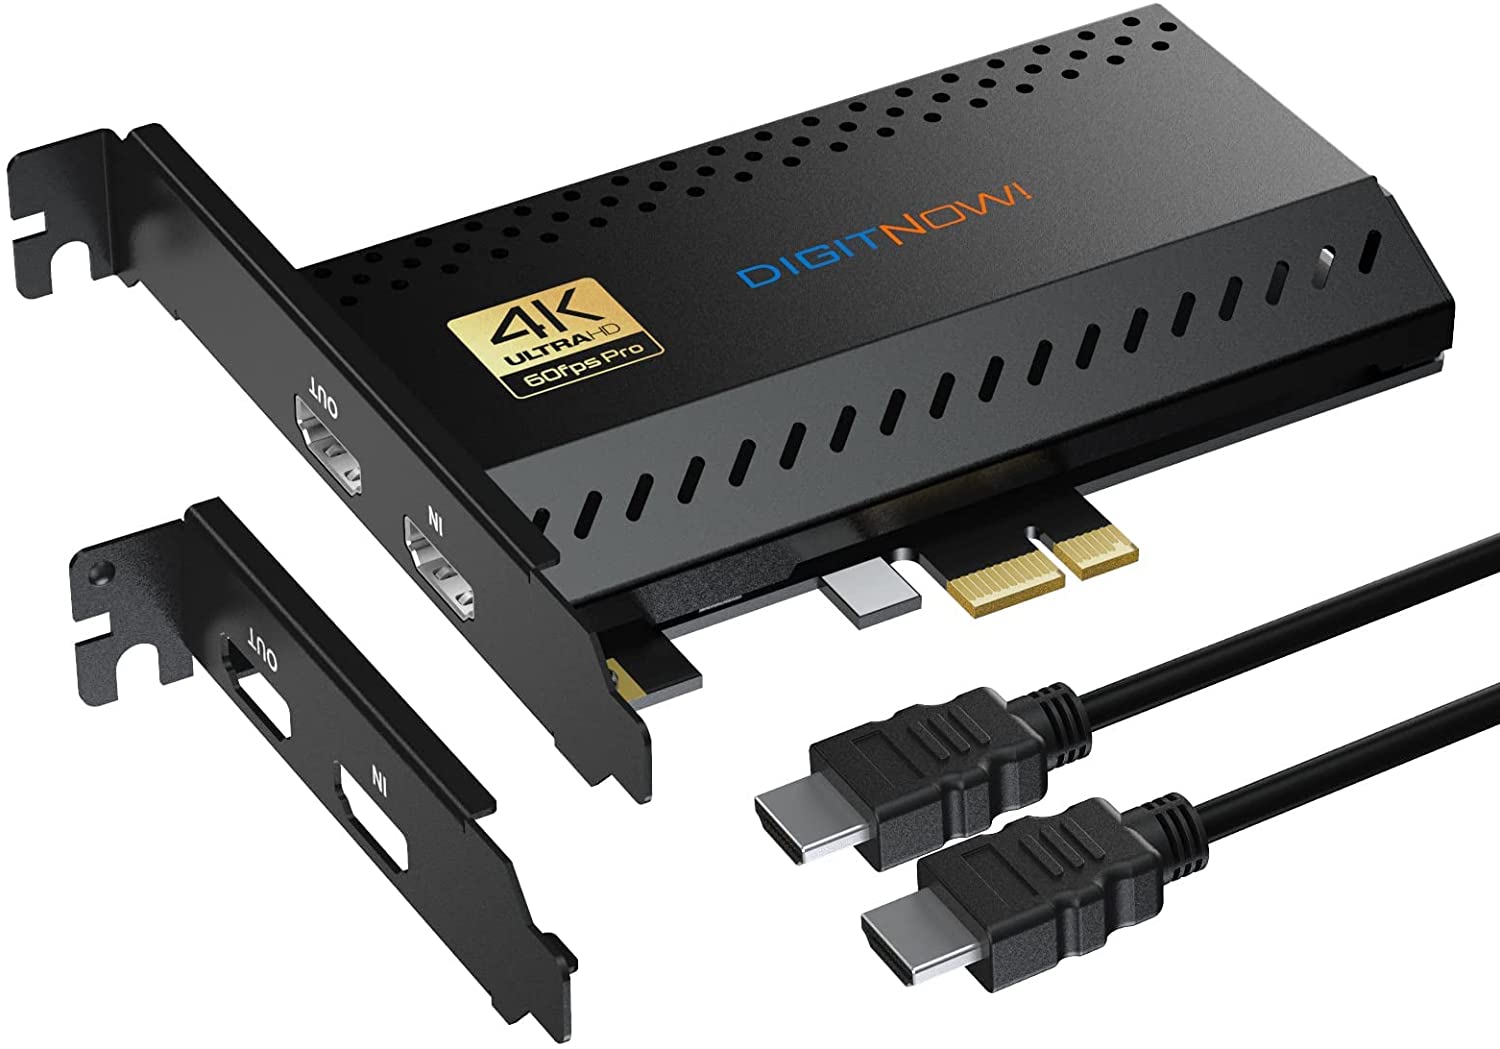 DIGITNOW 4K60 Pro PCIe Capture Card 4K60 Game Capture, Ultra-Low Latency, Zero-Lag Passthrough, High Refresh Rate Capture for Recording, Streaming, PS5, PS4 Pro, Xbox Series X/S, Xbox One X